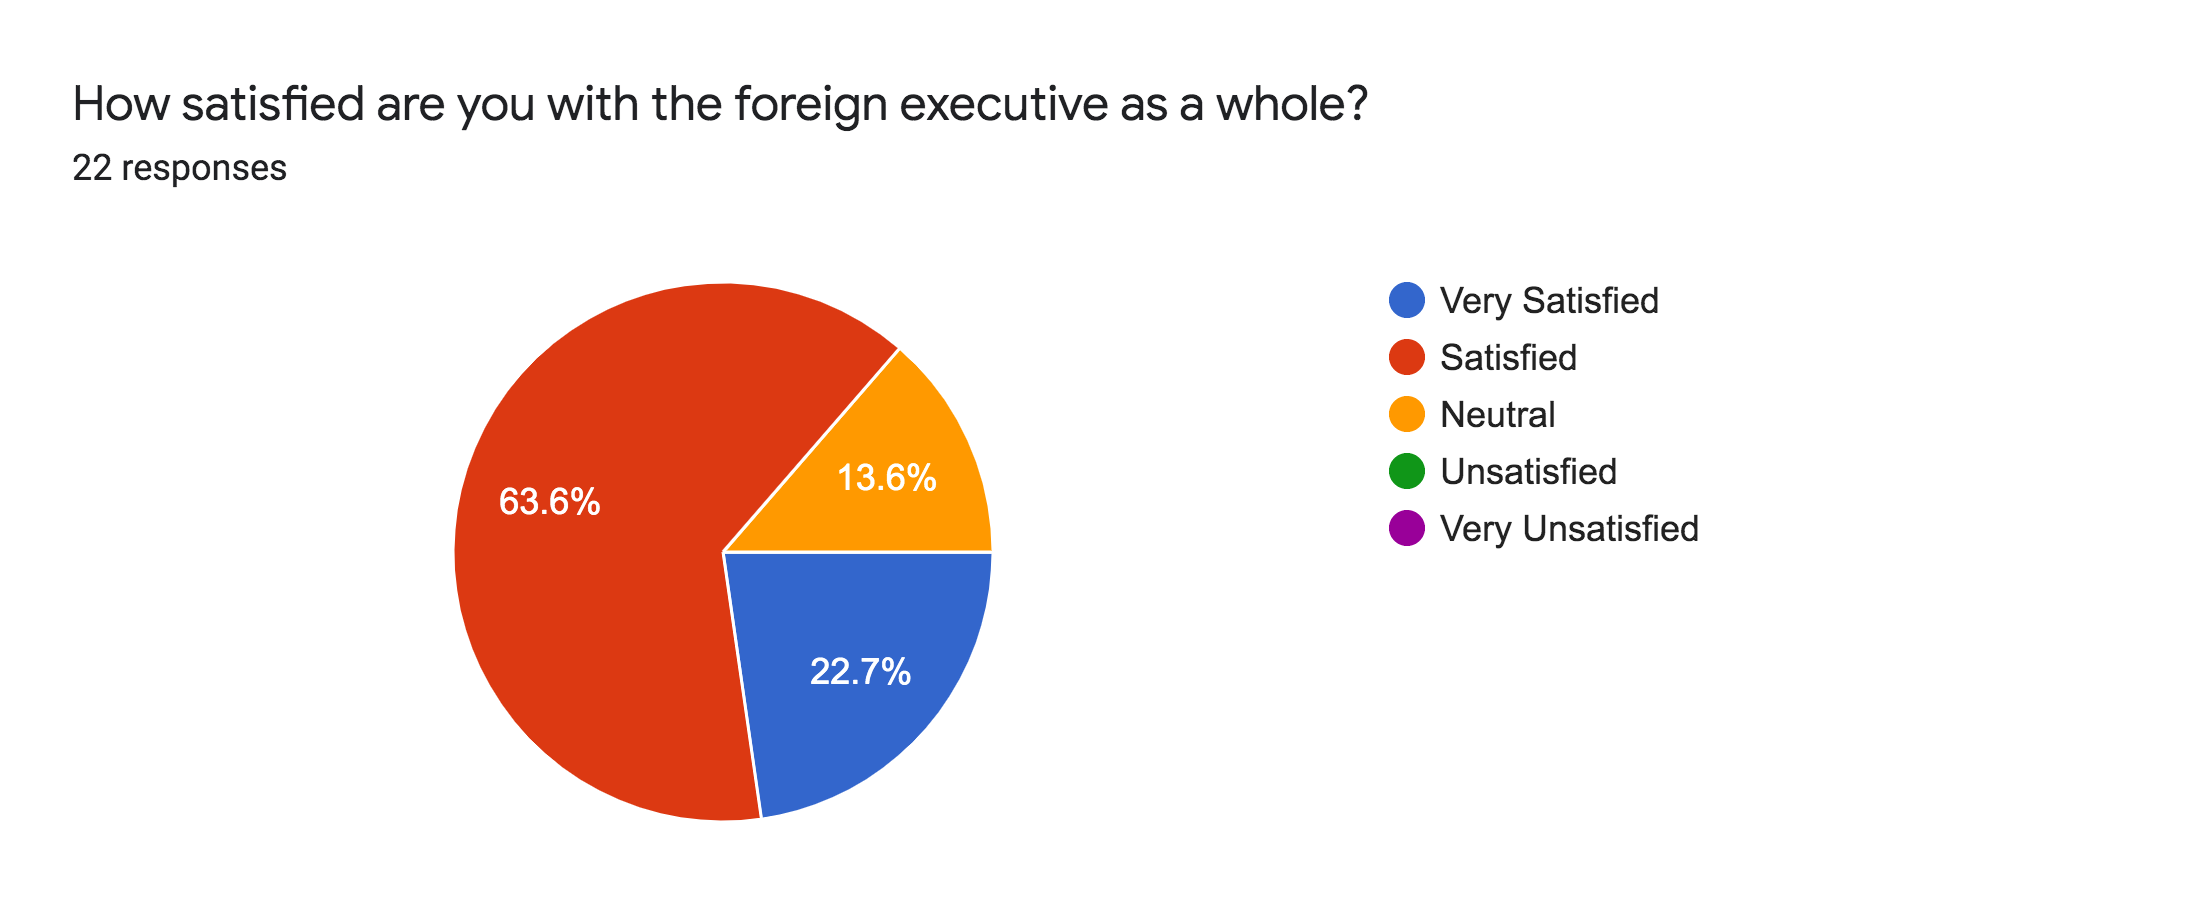 Forms response chart. Question title: How satisfied are you with the foreign executive as a whole?. Number of responses: 22 responses.